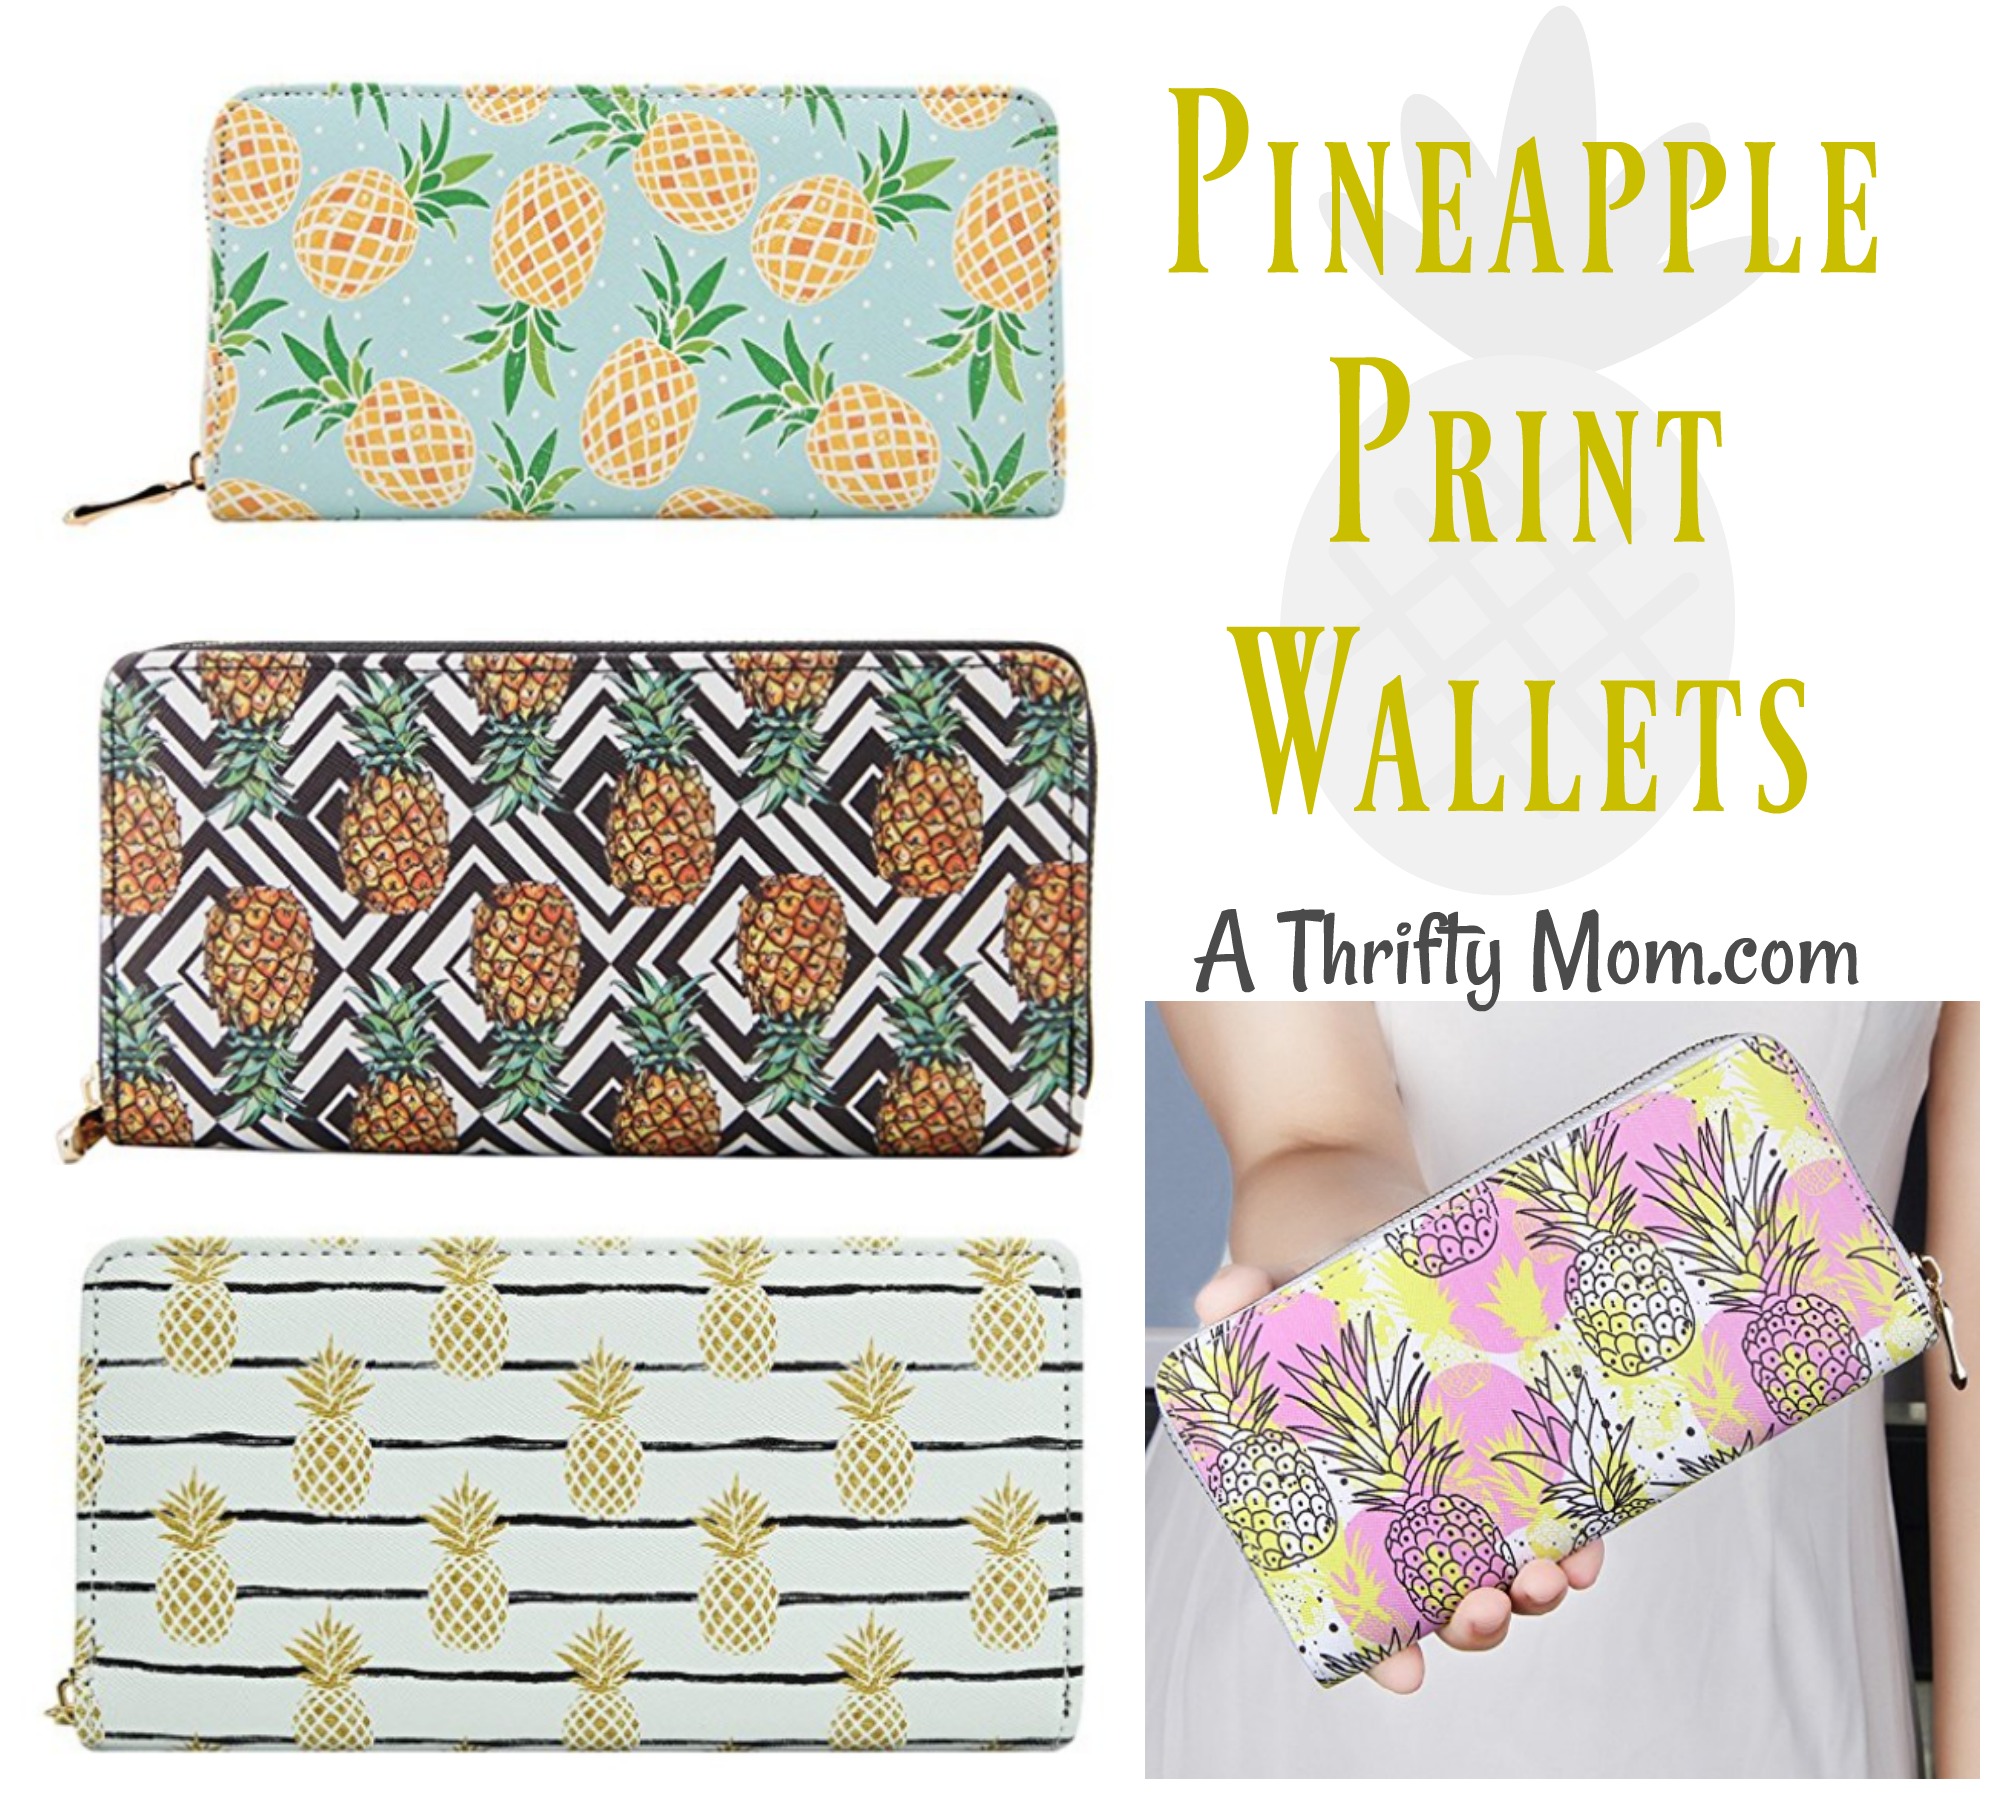 Leather Pineapple Print Wallets